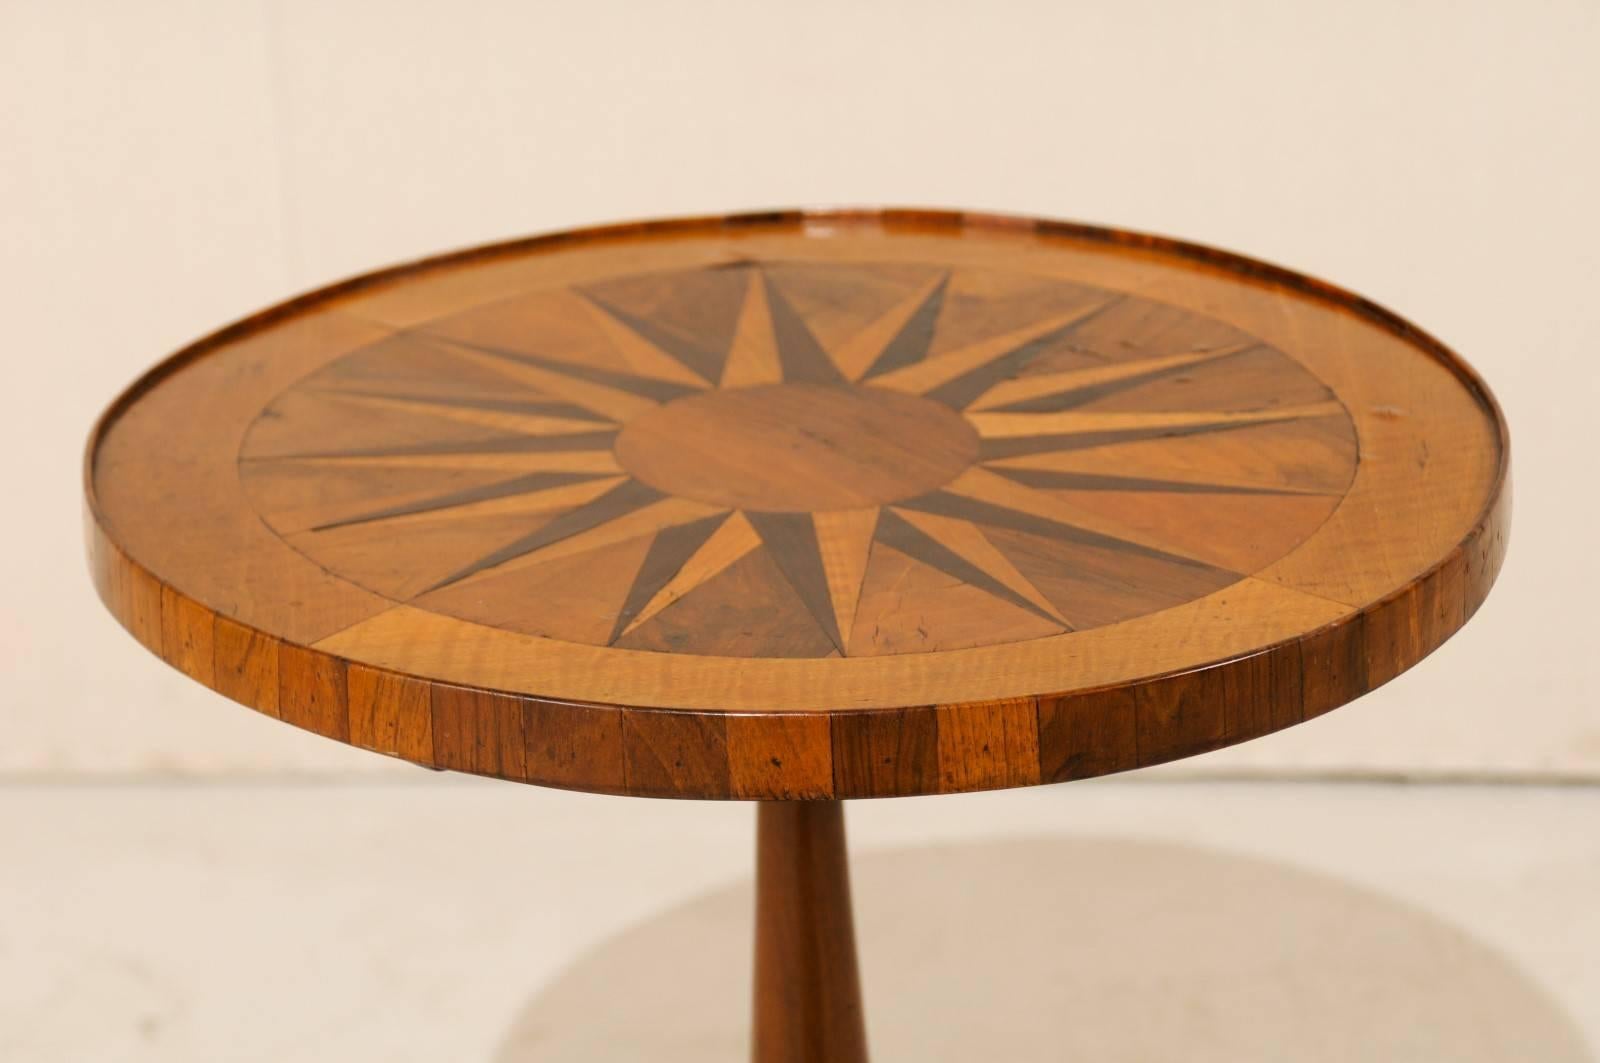 Italian 19th Century Round Fruitwood Pedestal Table with Compass Star Inlay 1